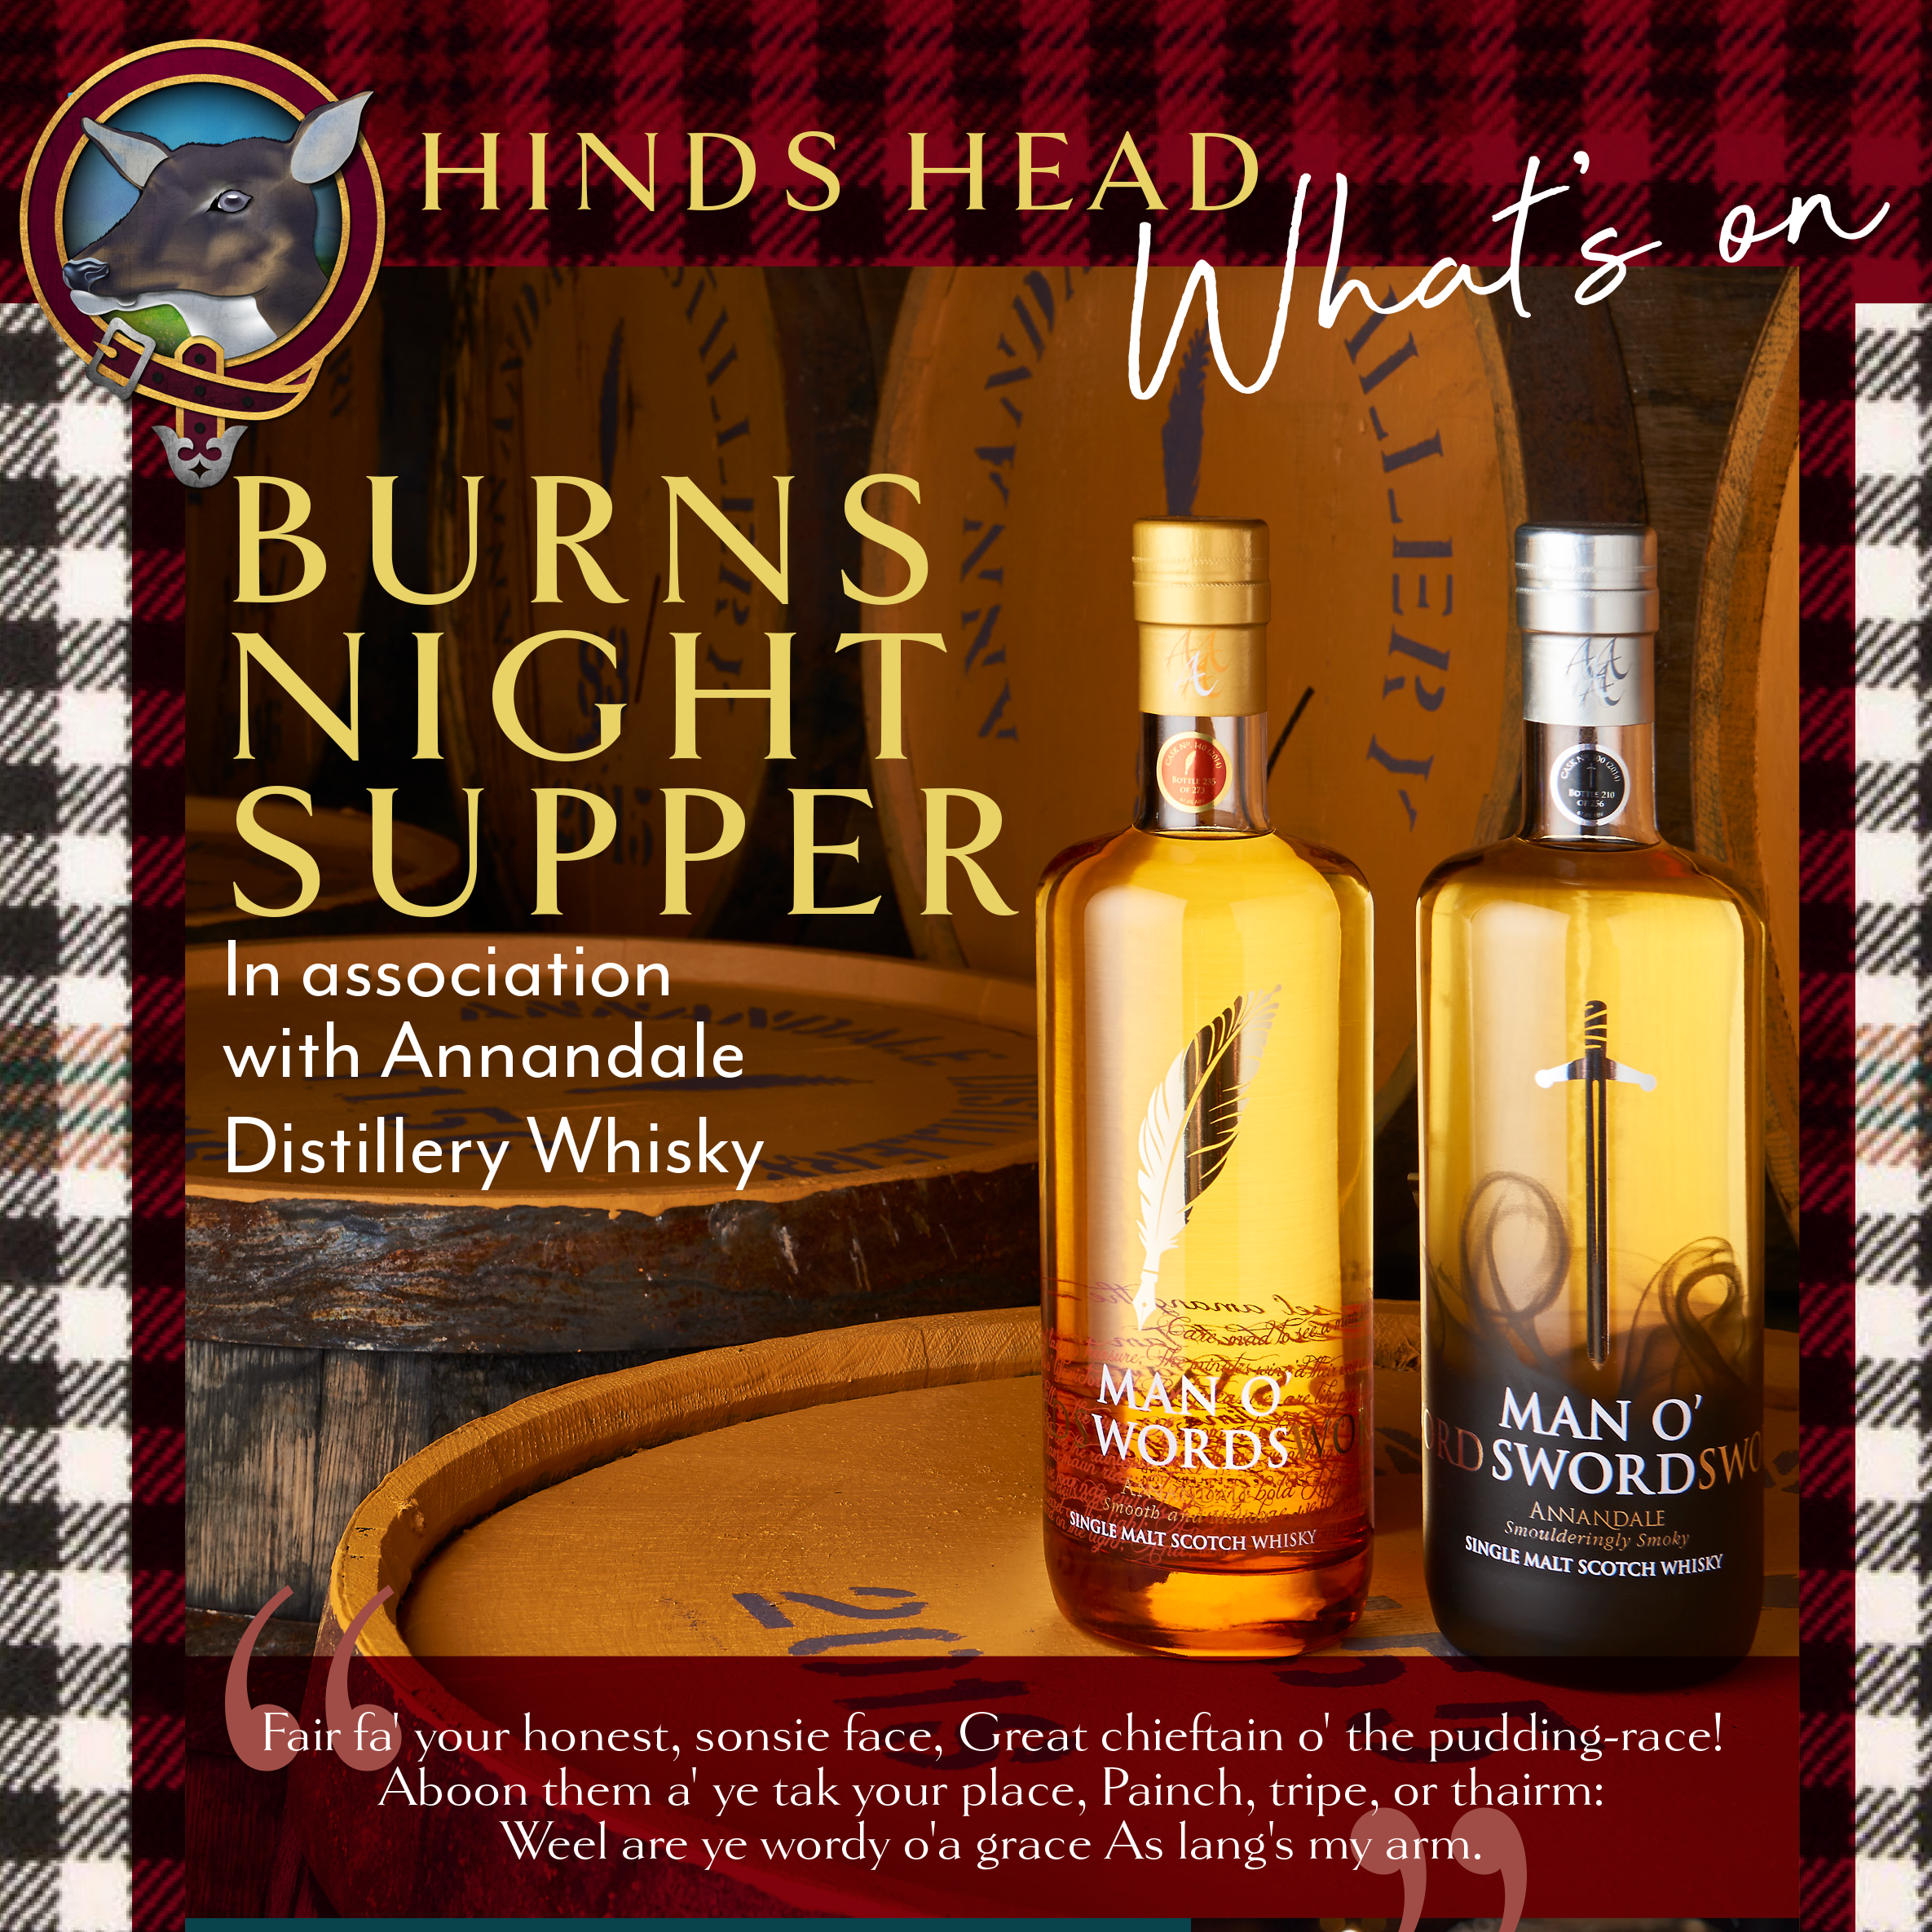 Burns Night with Annandale Distillery Whisky Tasting